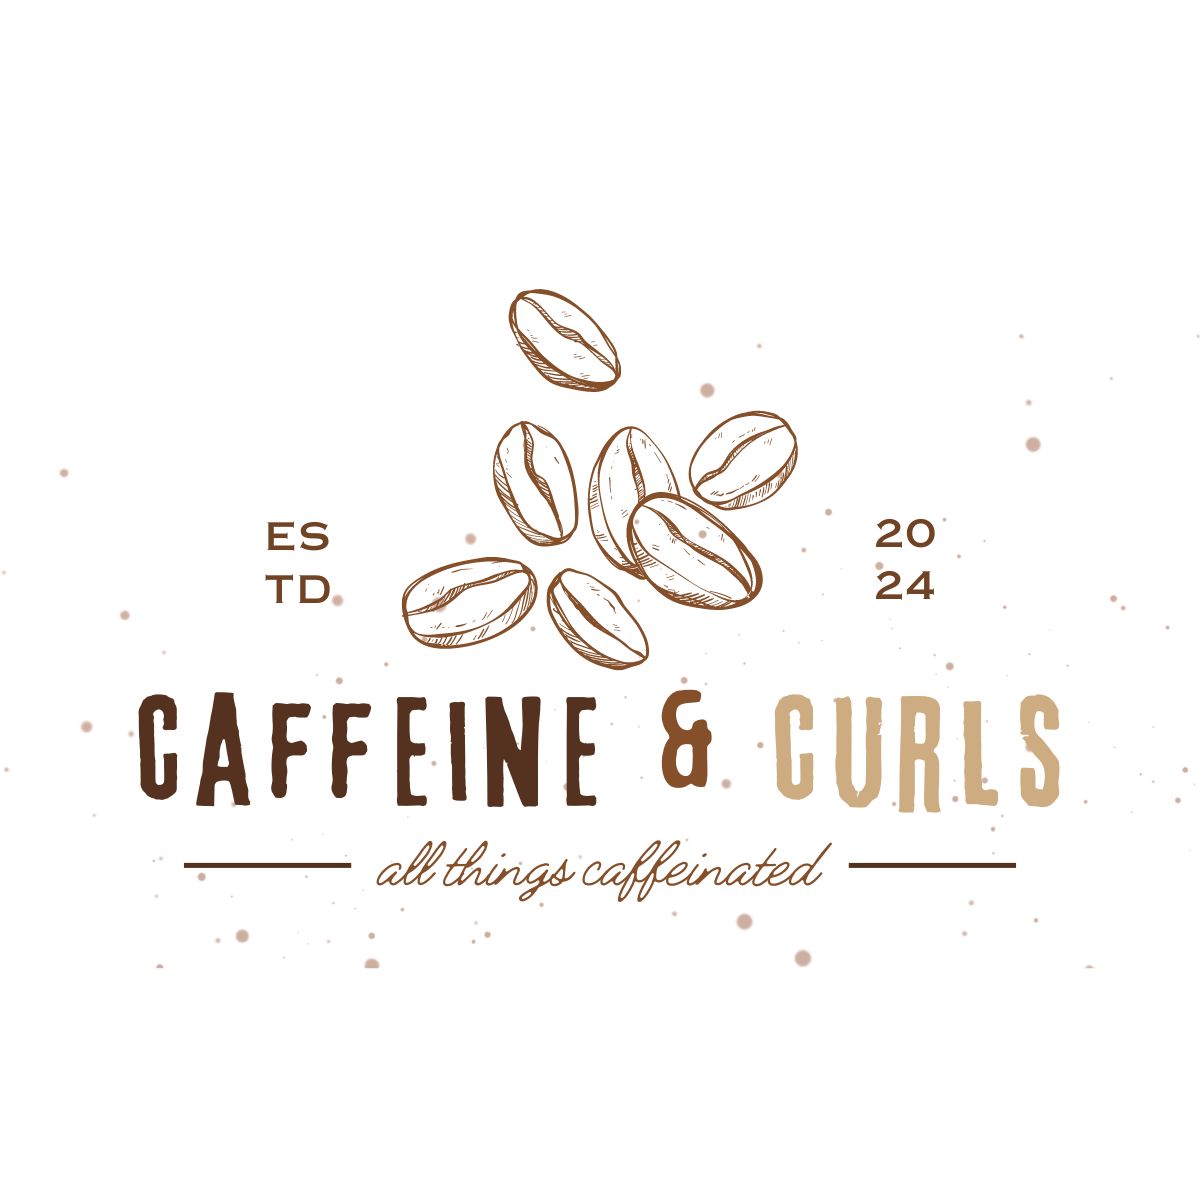 caffeine and curls featured image graphic.